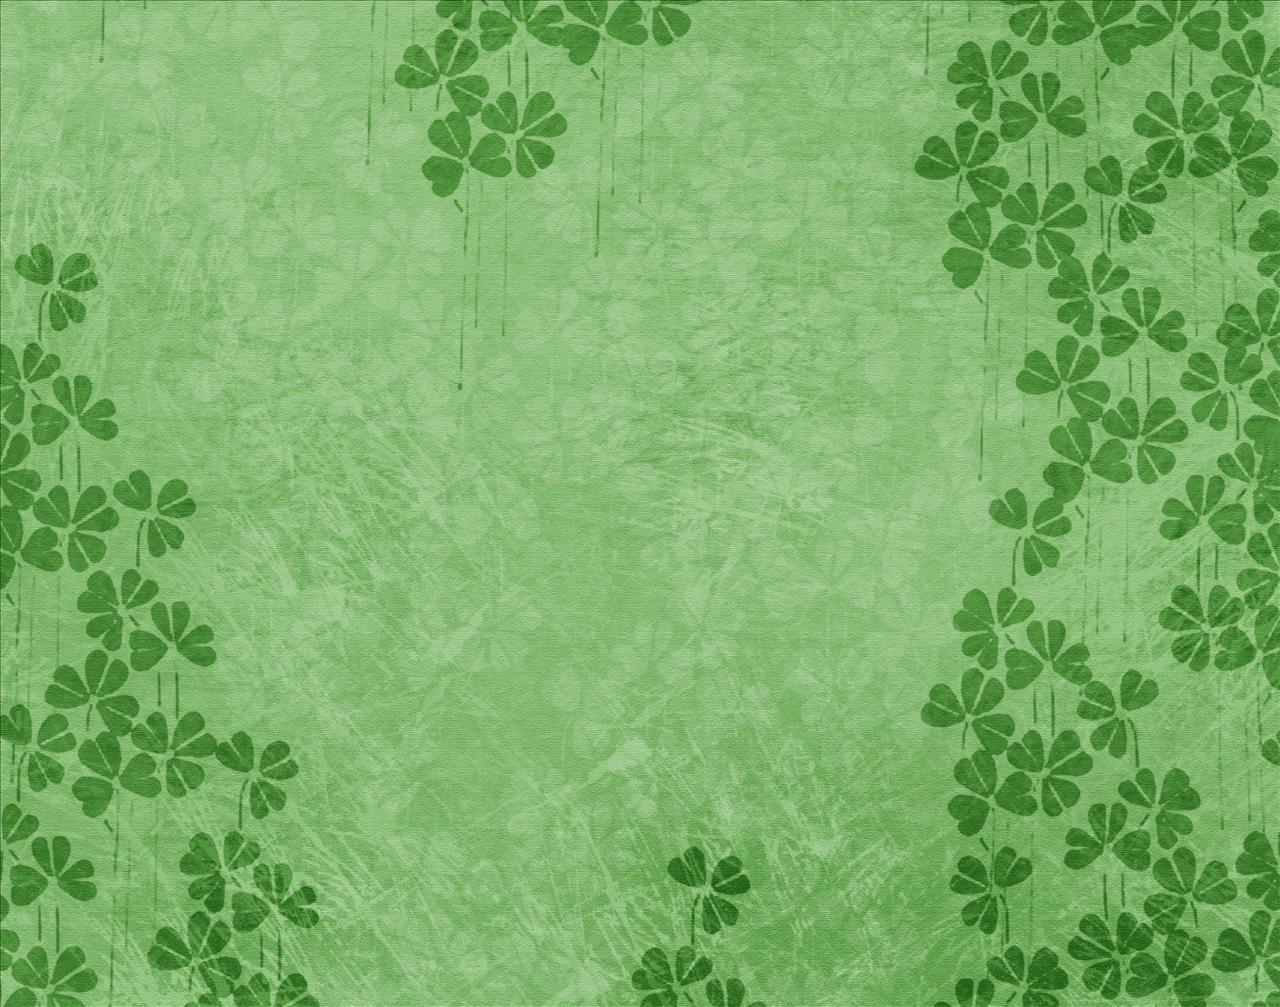 Luck O The Irish Publish With Glogster